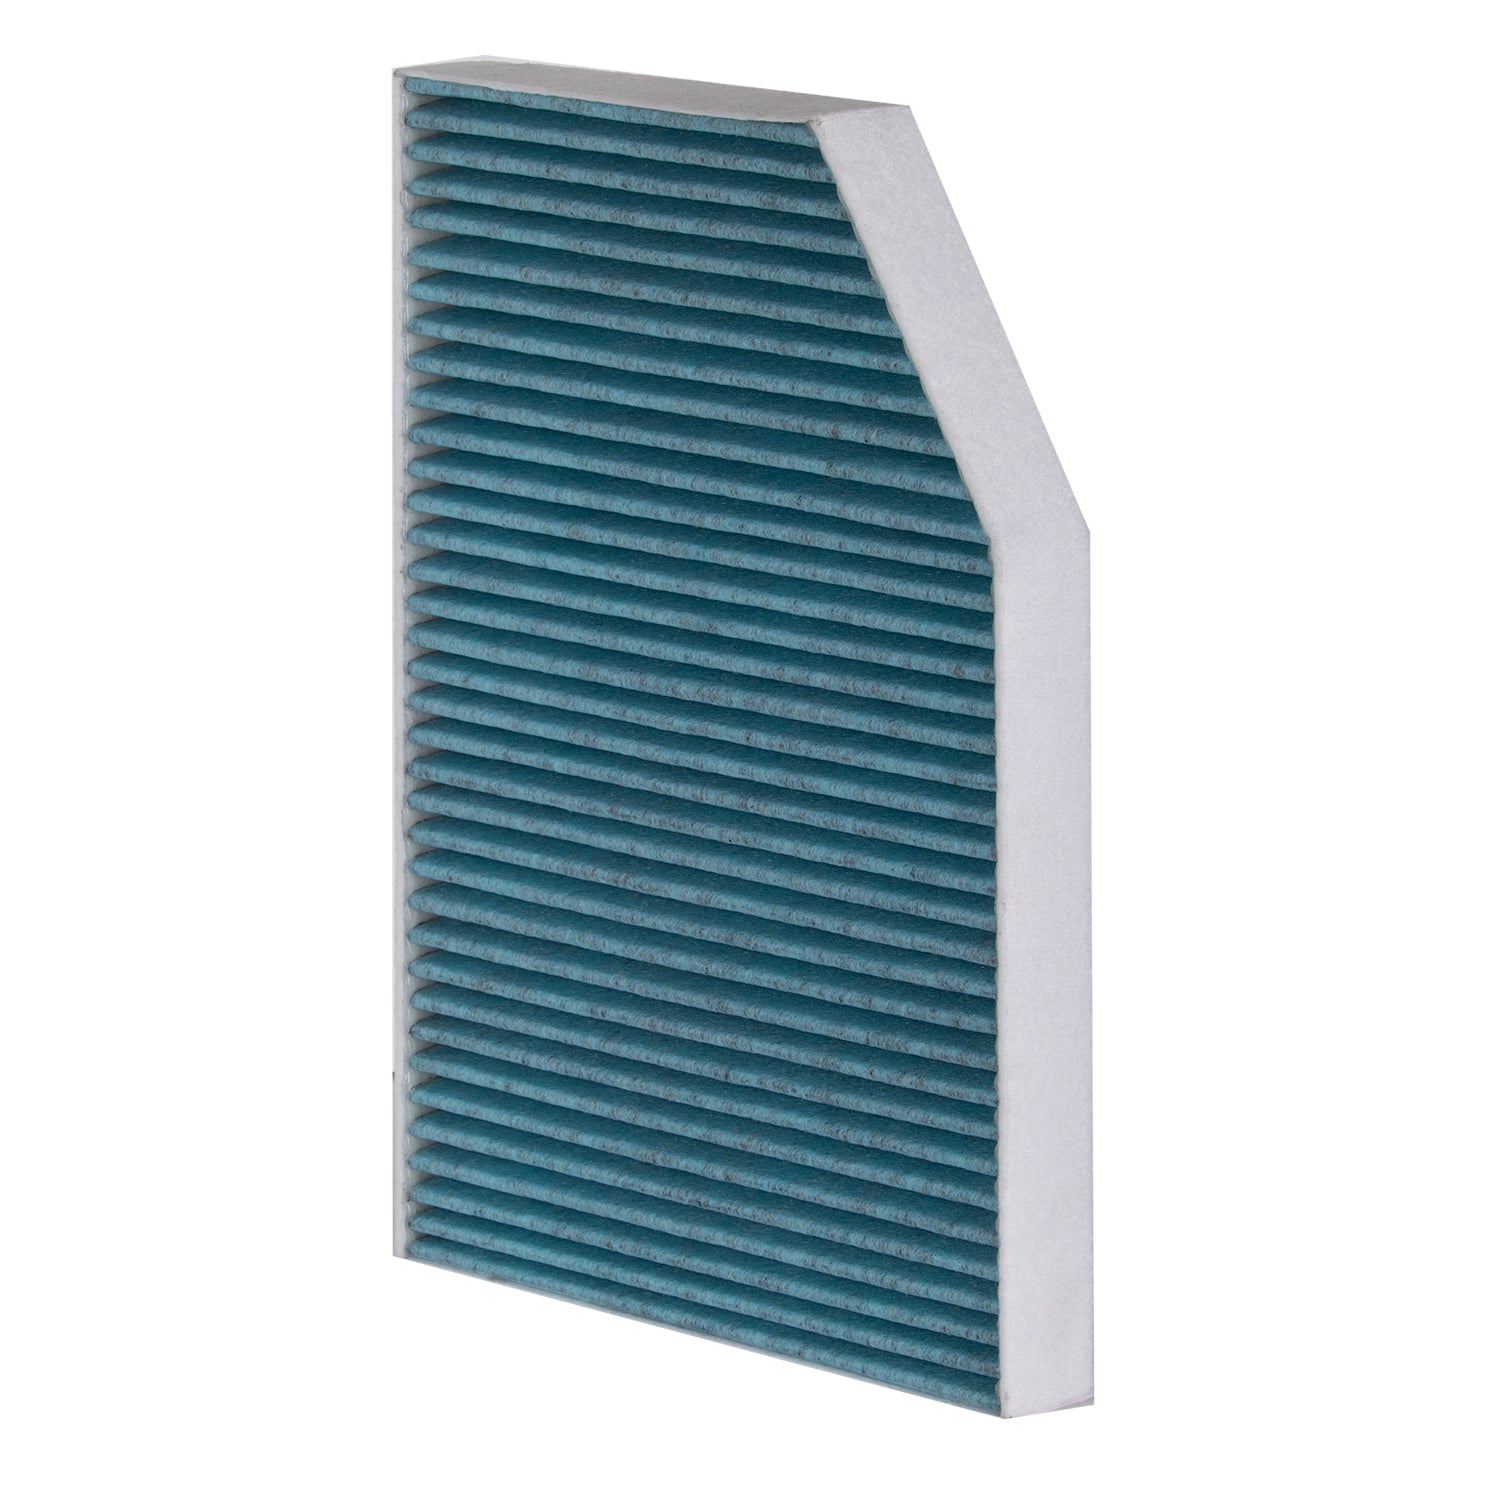 2022 BMW 320i Cabin Air Filter  PC99458X